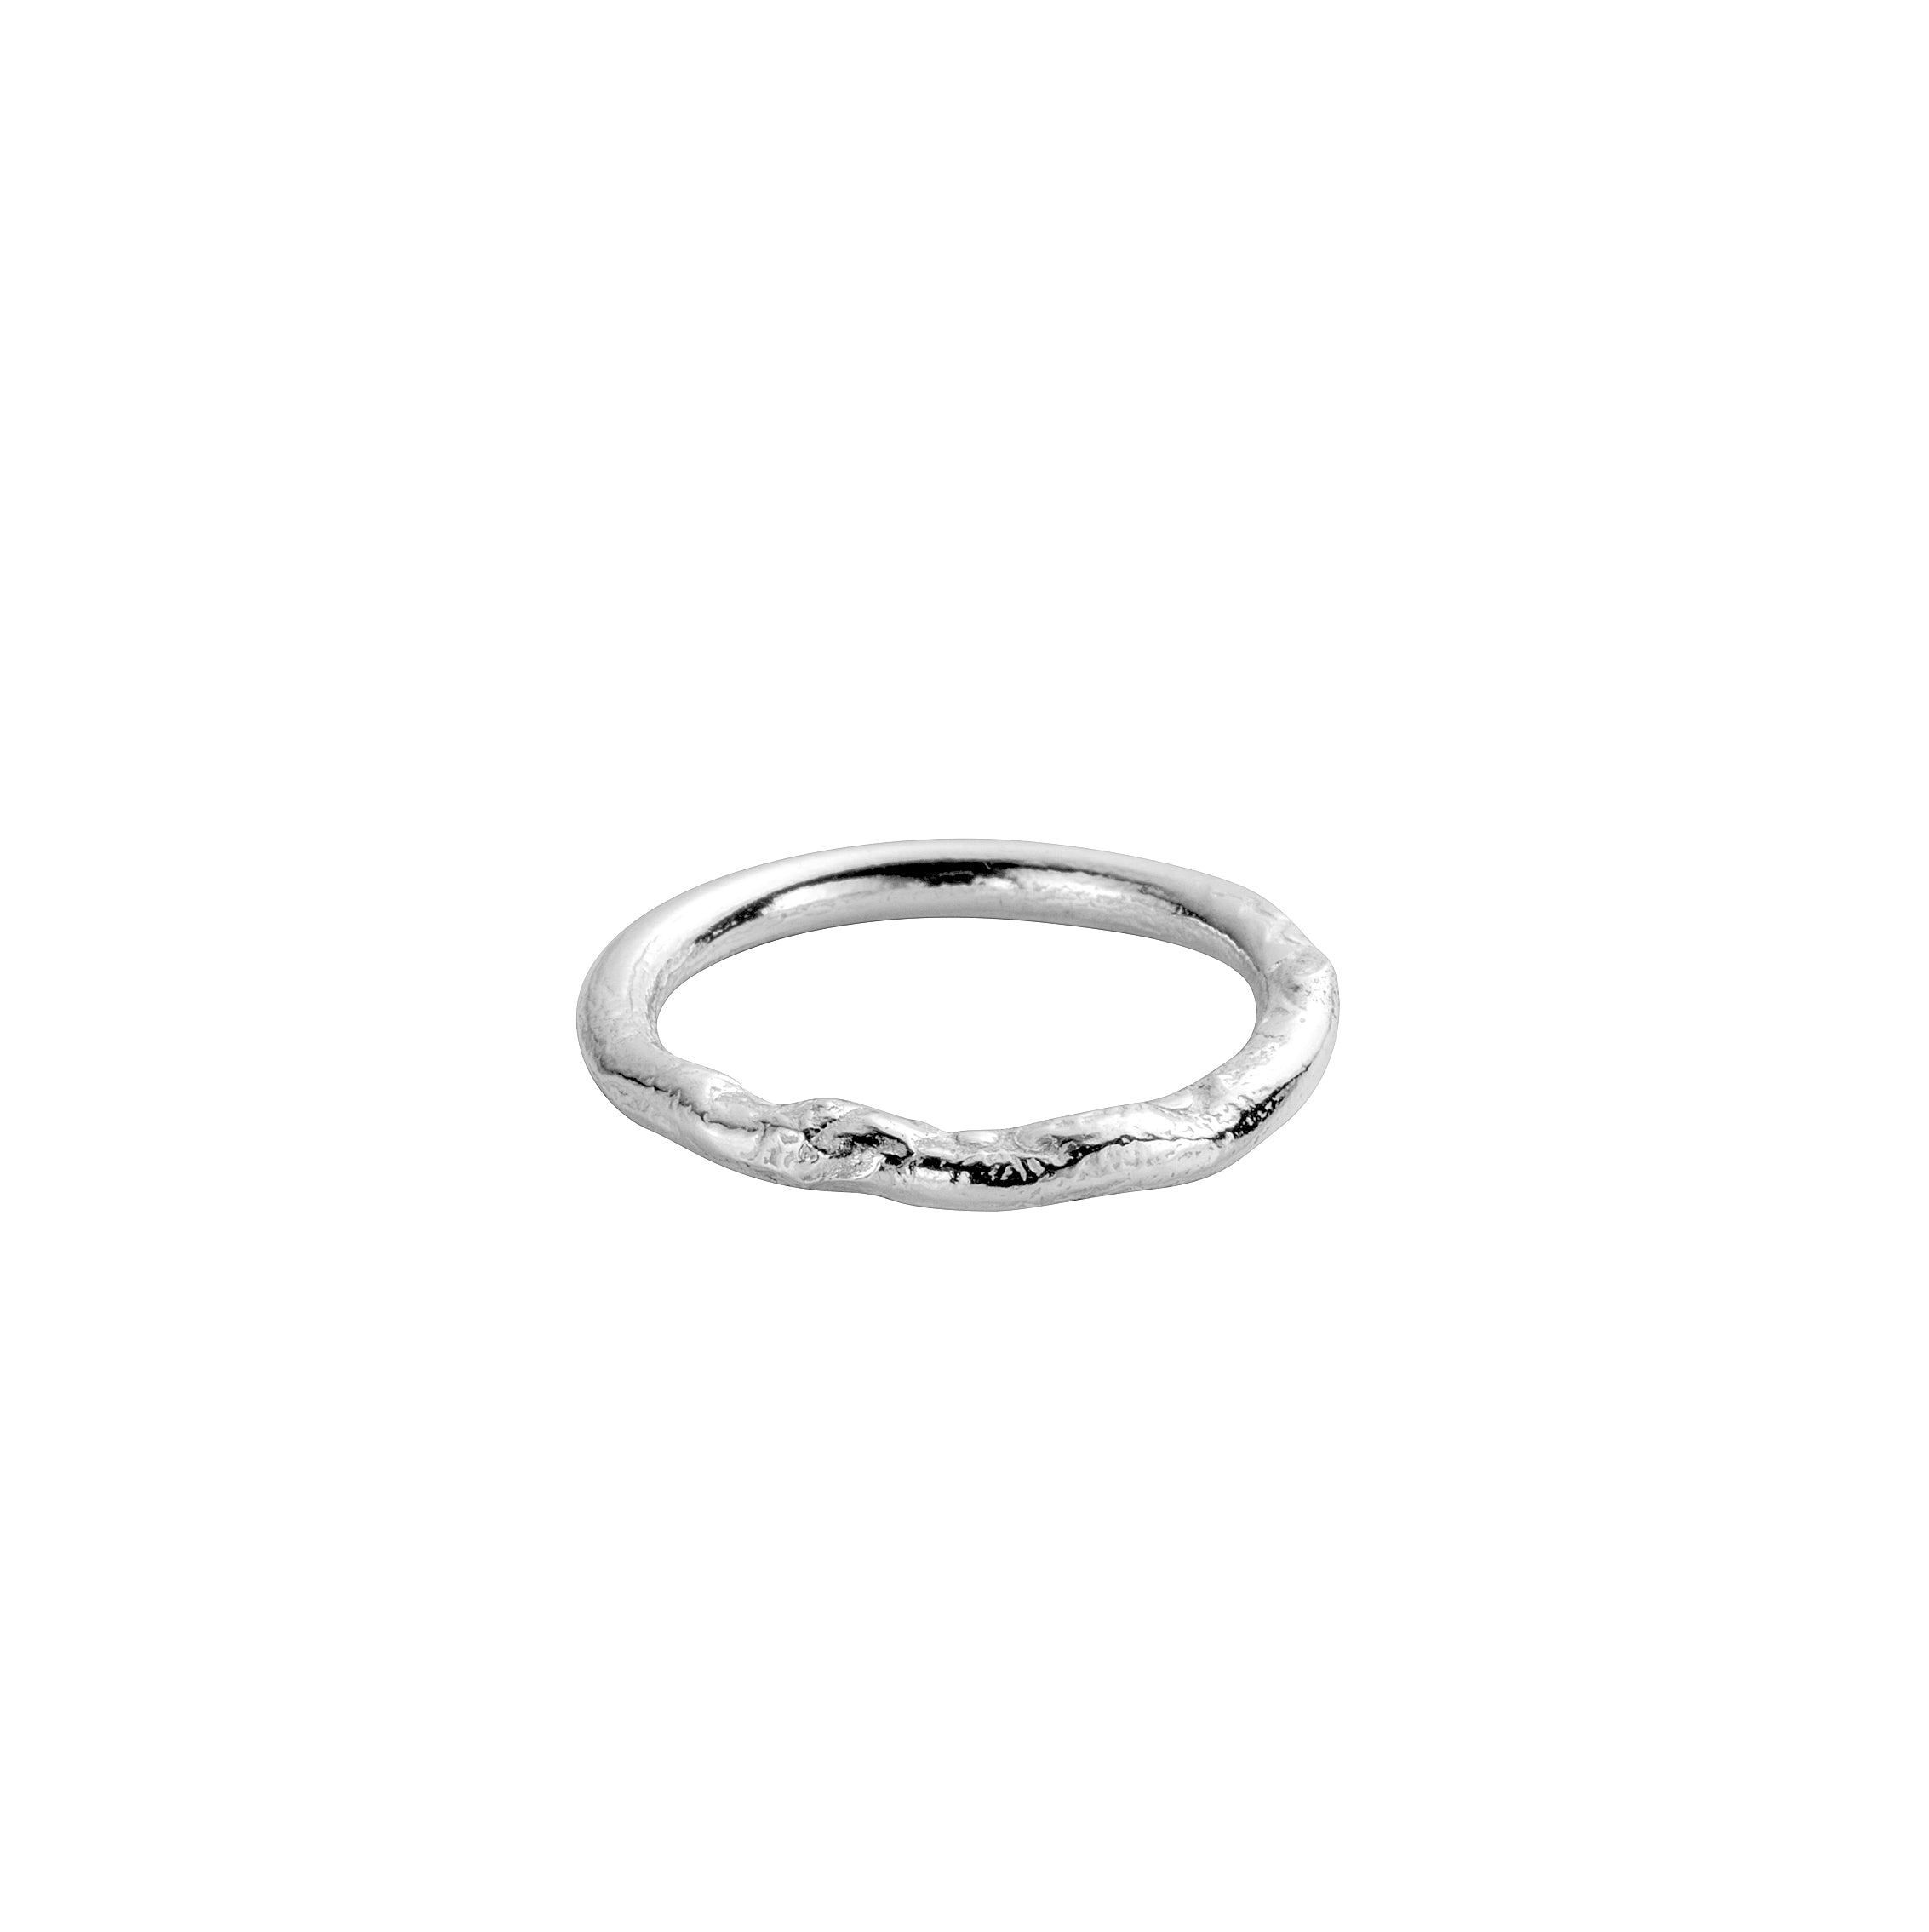 Silver Stack Ring